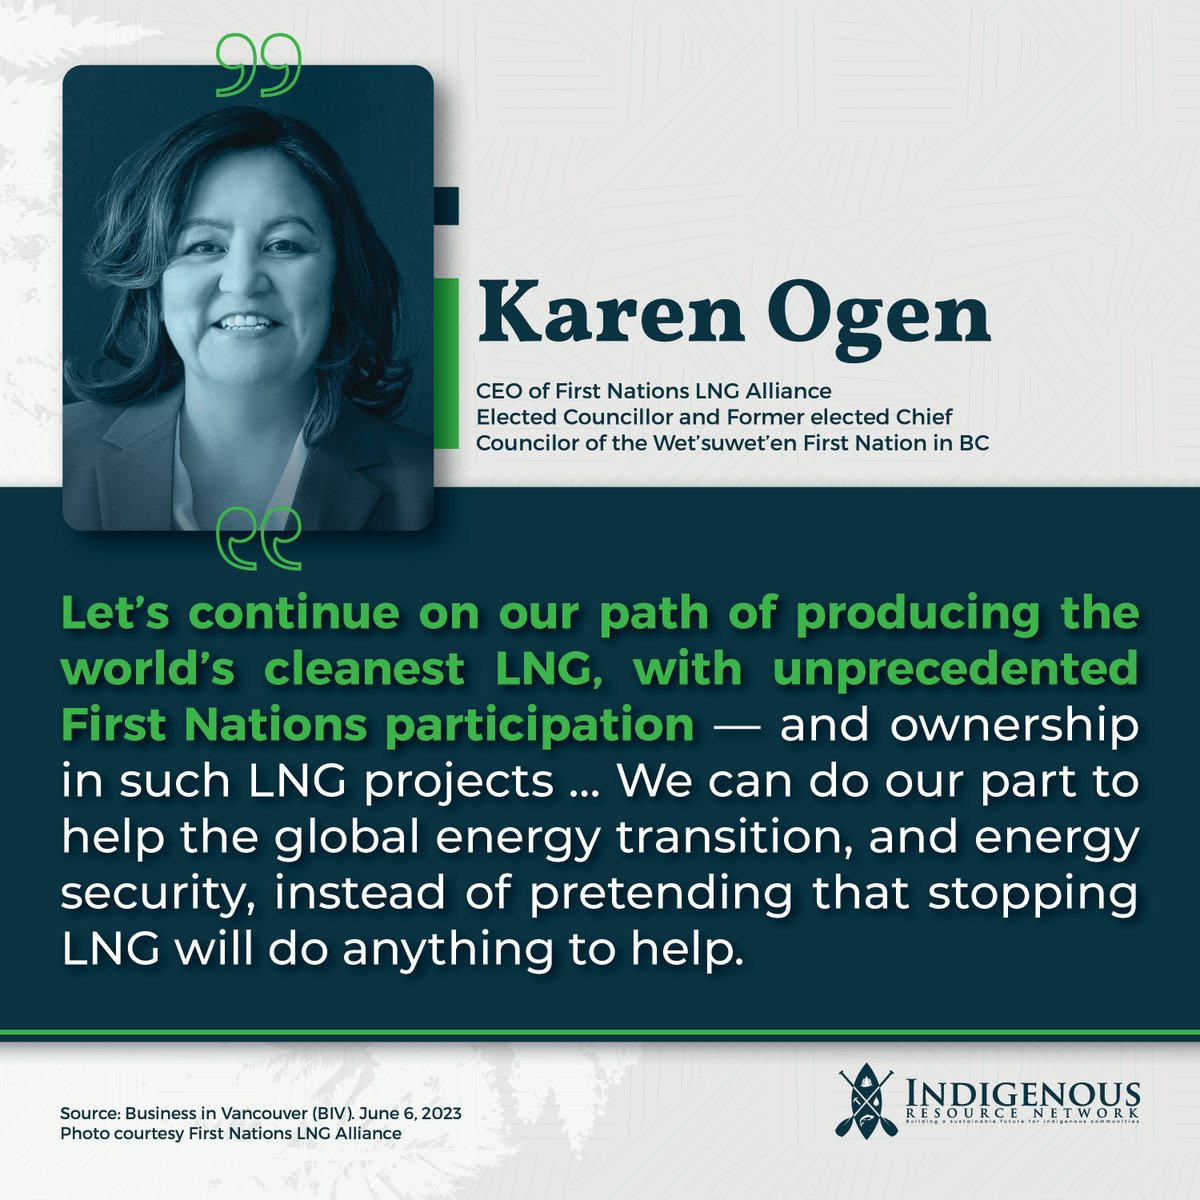 Great thought leadership from @FNLNGAlliance CEO Karen Ogen Indigenous LNG can play a role in the energy transition and supply the world with cleaner and more reliable energy. #IndigenousLNG #CanadaLNG #Indigenousownership